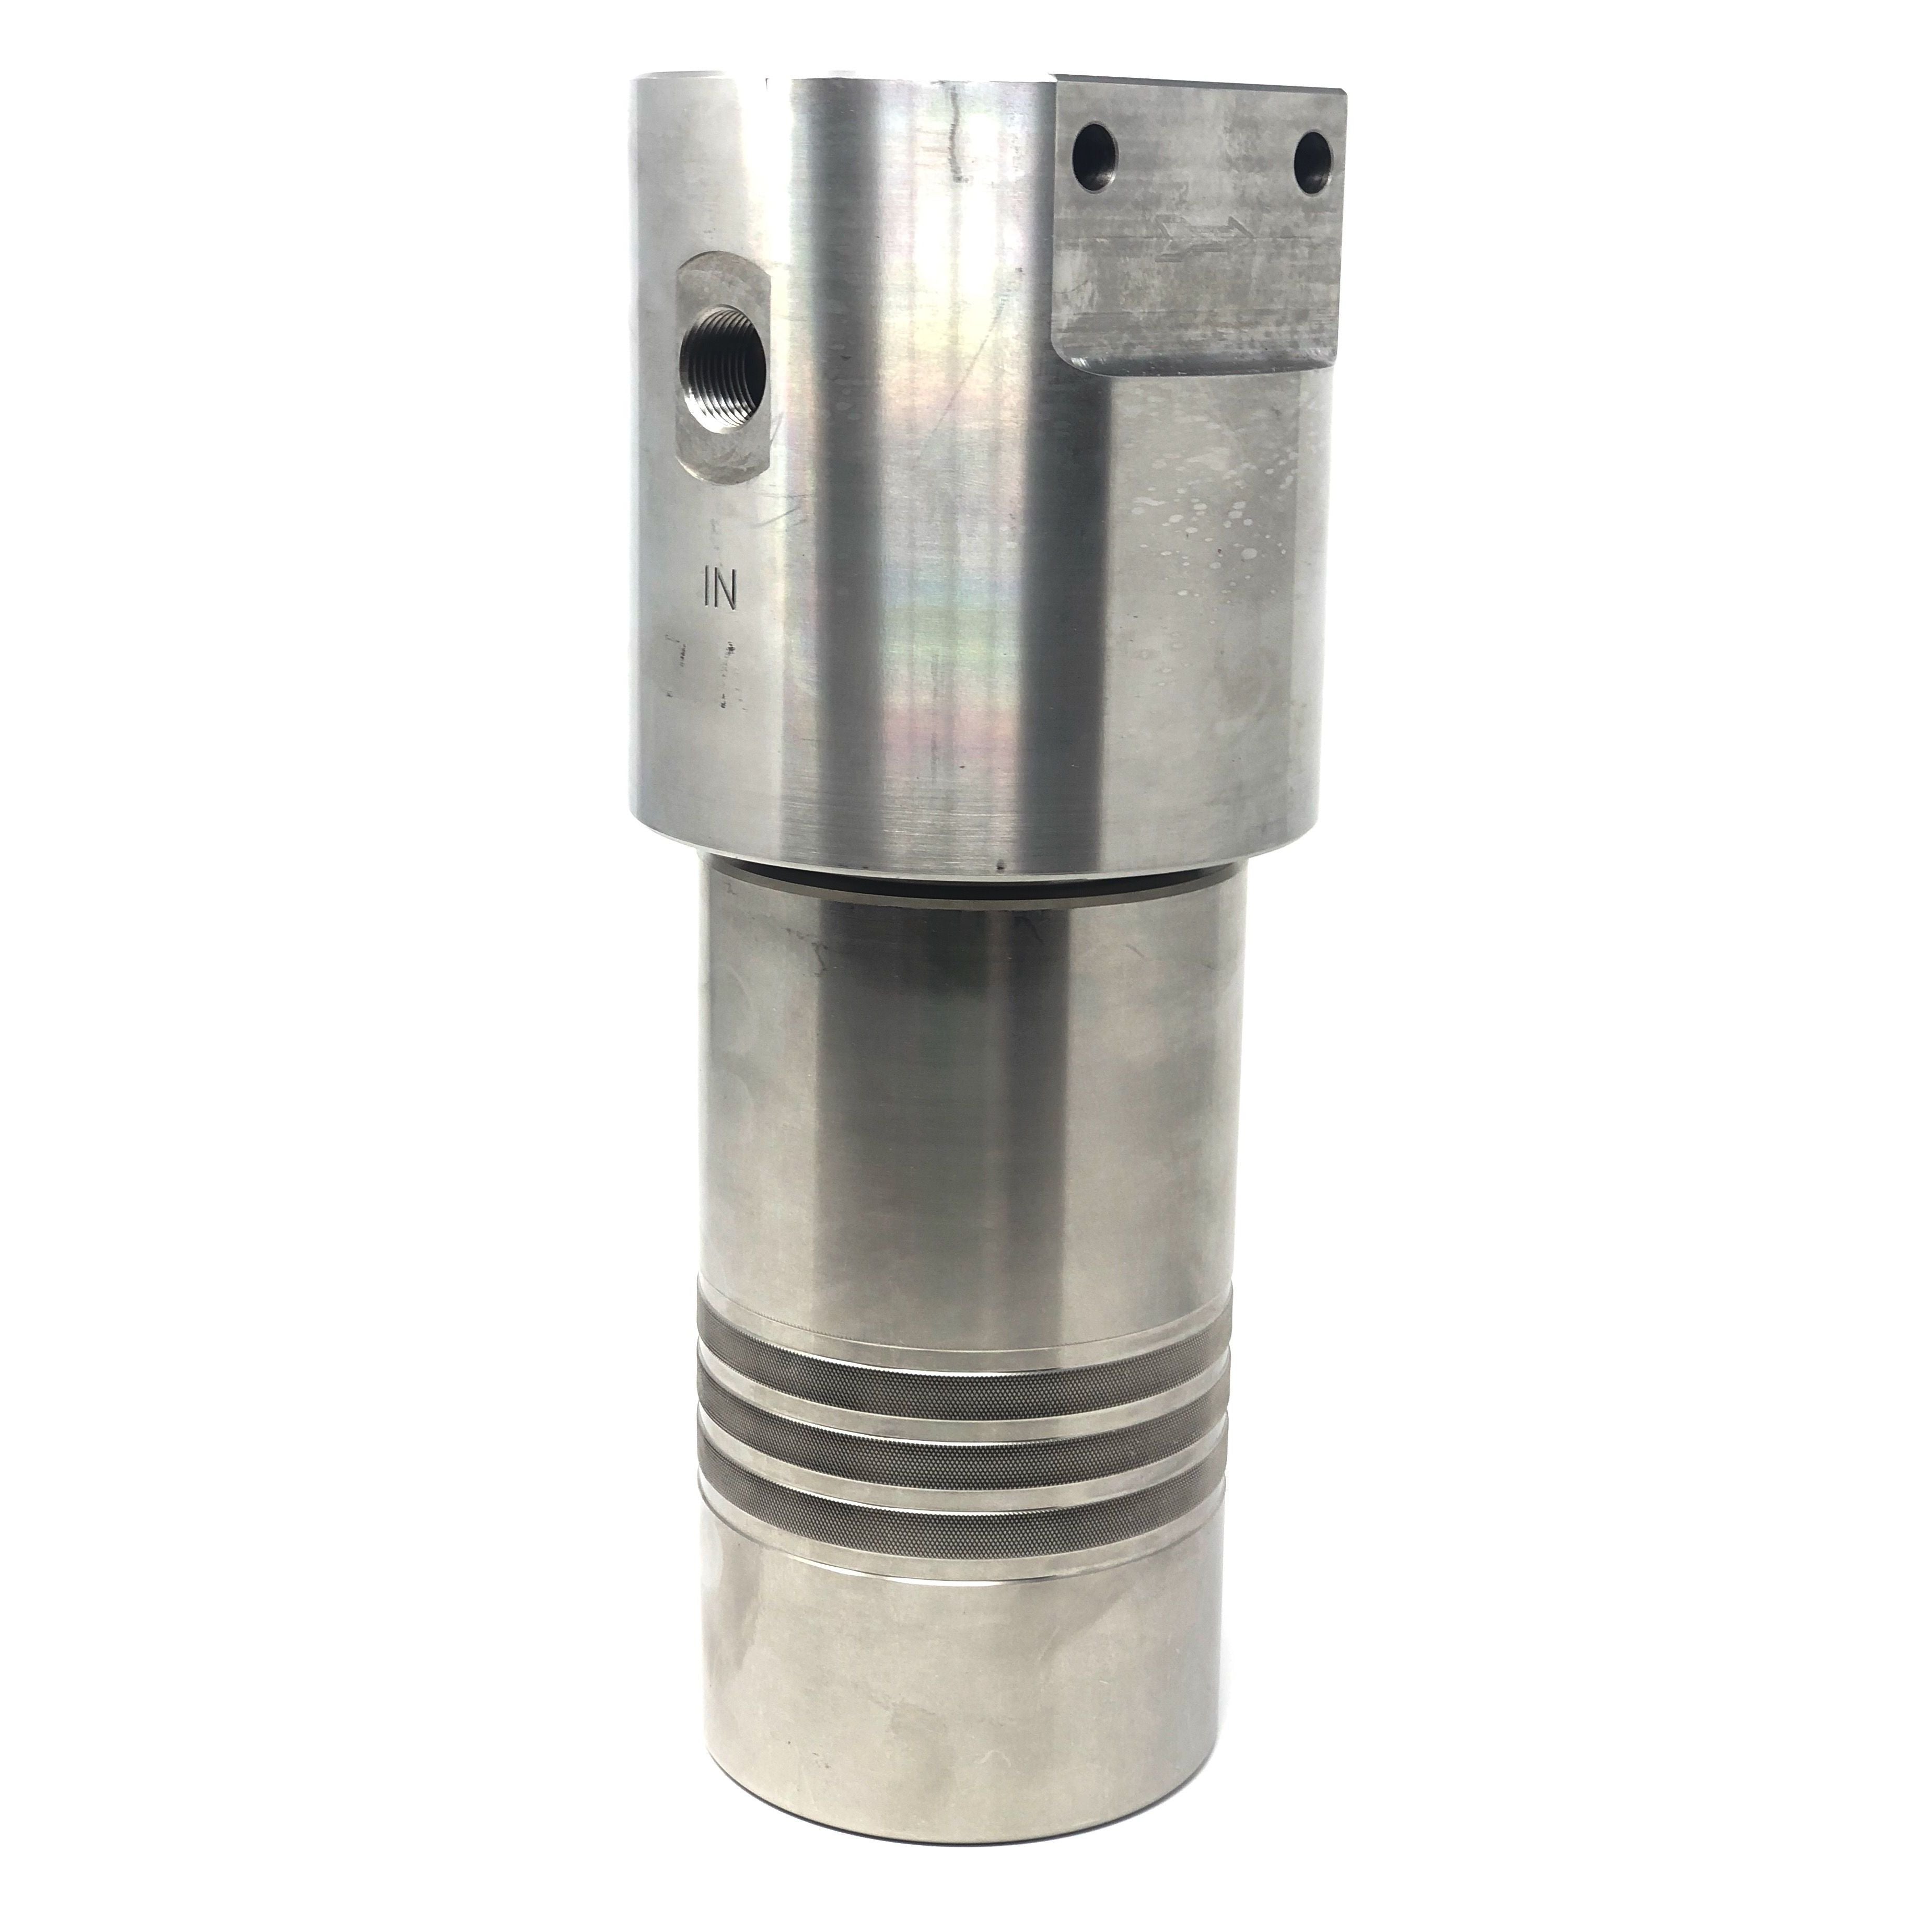 52P-168N-3MDN-V : Chase Ultra High Pressure Inline Filter, 20000psi, 1/2" NPT, 3 Micron, With Visual Indicator, No Bypass